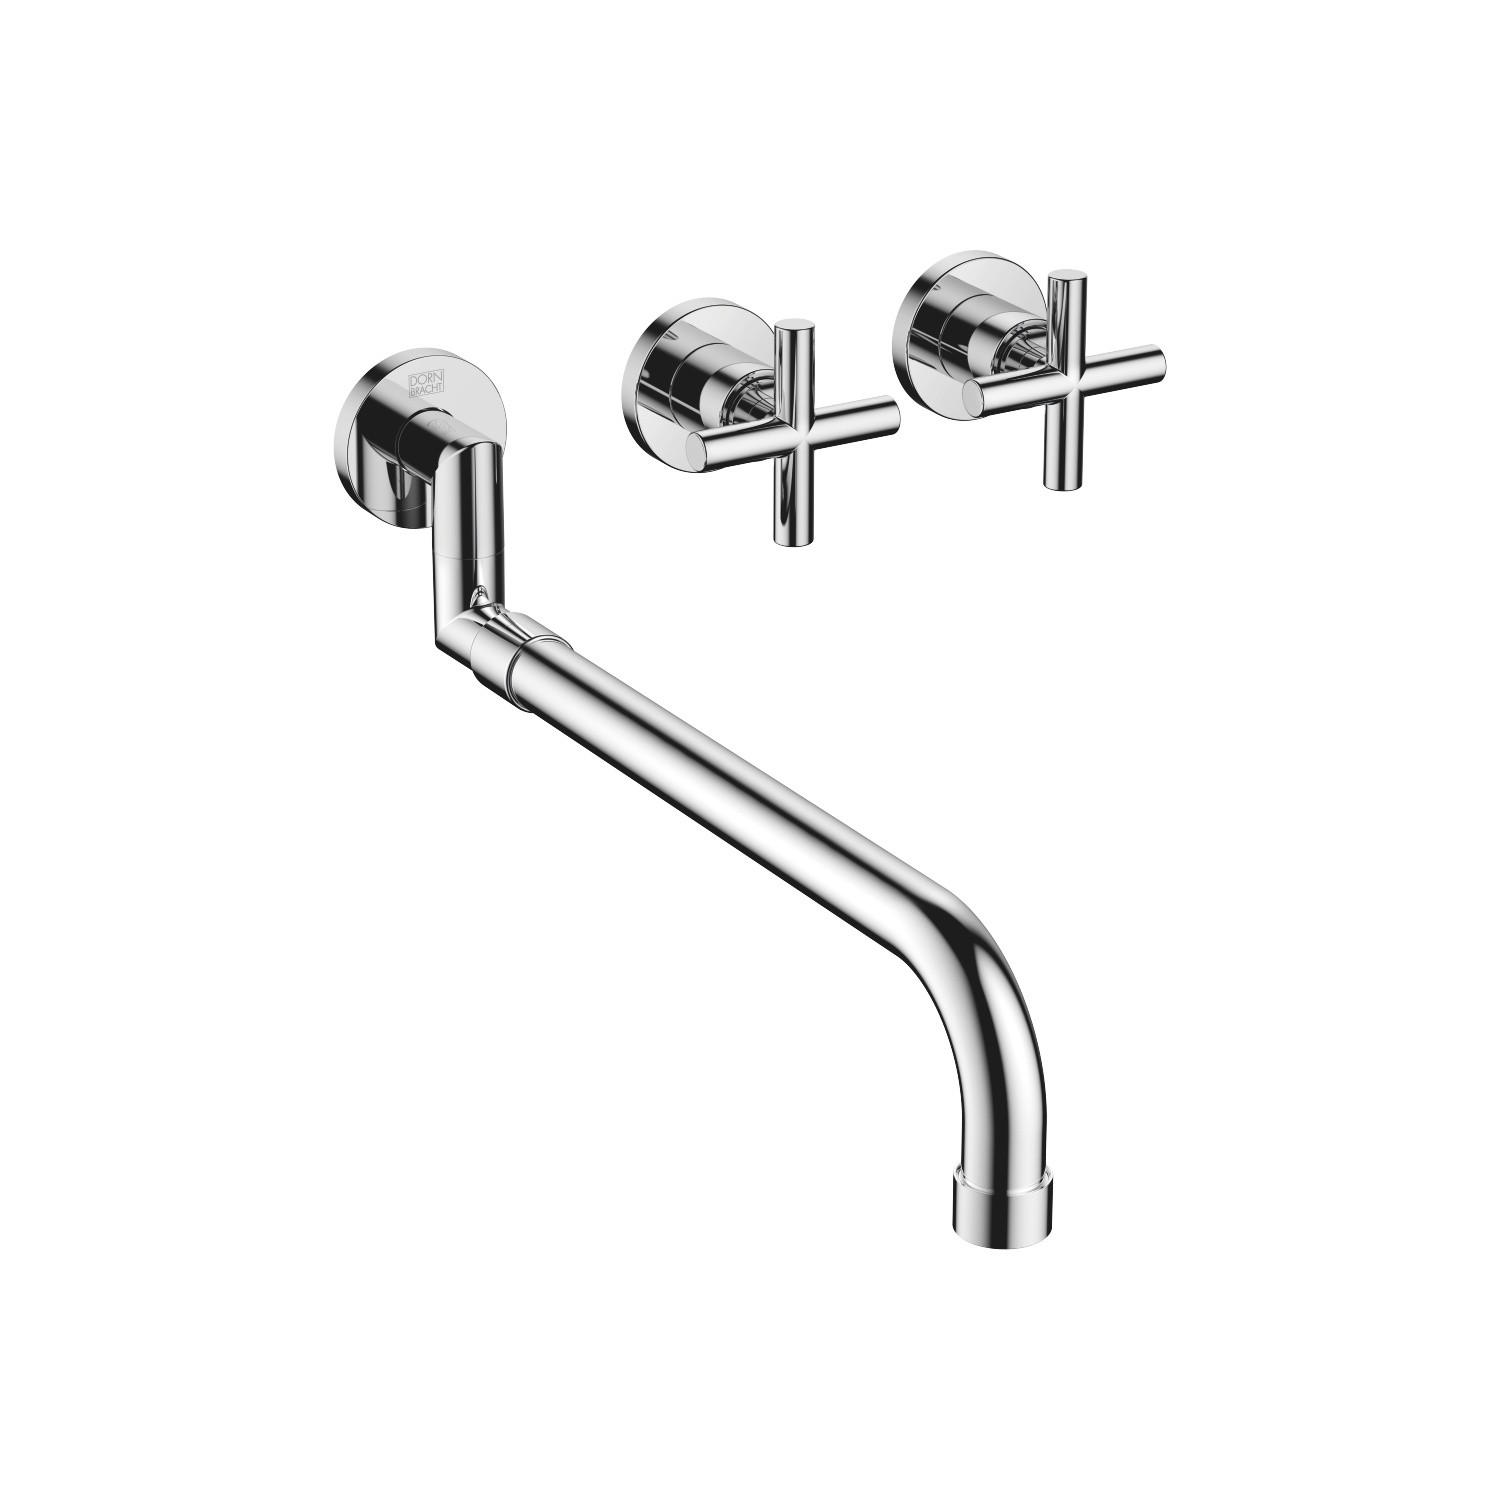 DORNBRACHT 36819892-060010 TARA THREE HOLES WALL MOUNT WIDESPREAD KITCHEN  FAUCET WITH PULL OUT SPOUT, PLATINUM MATTE